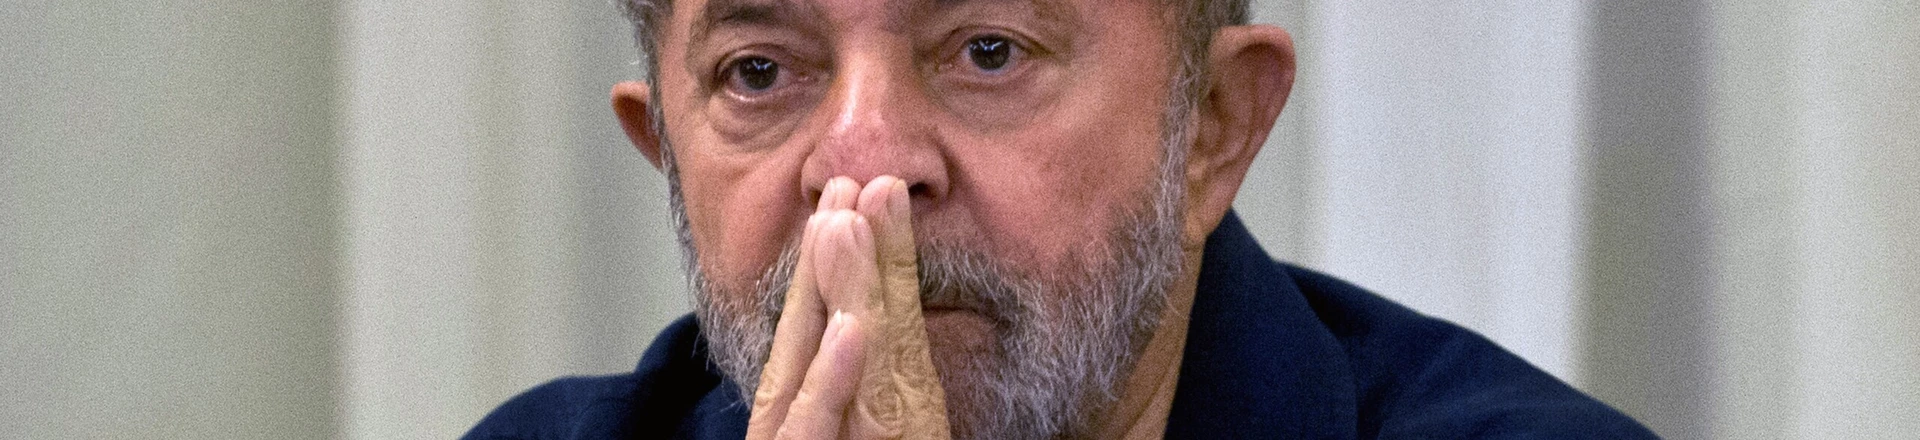 Former Brazilian President (2003-2011) Luiz Inacio Lula da Silva gestures during a meeting with the Workers' Party (PT) members in Sao Paulo, Brazil on March 30, 2015 AFP PHOTO / Nelson ALMEIDA        (Photo credit should read NELSON ALMEIDA/AFP/Getty Images)